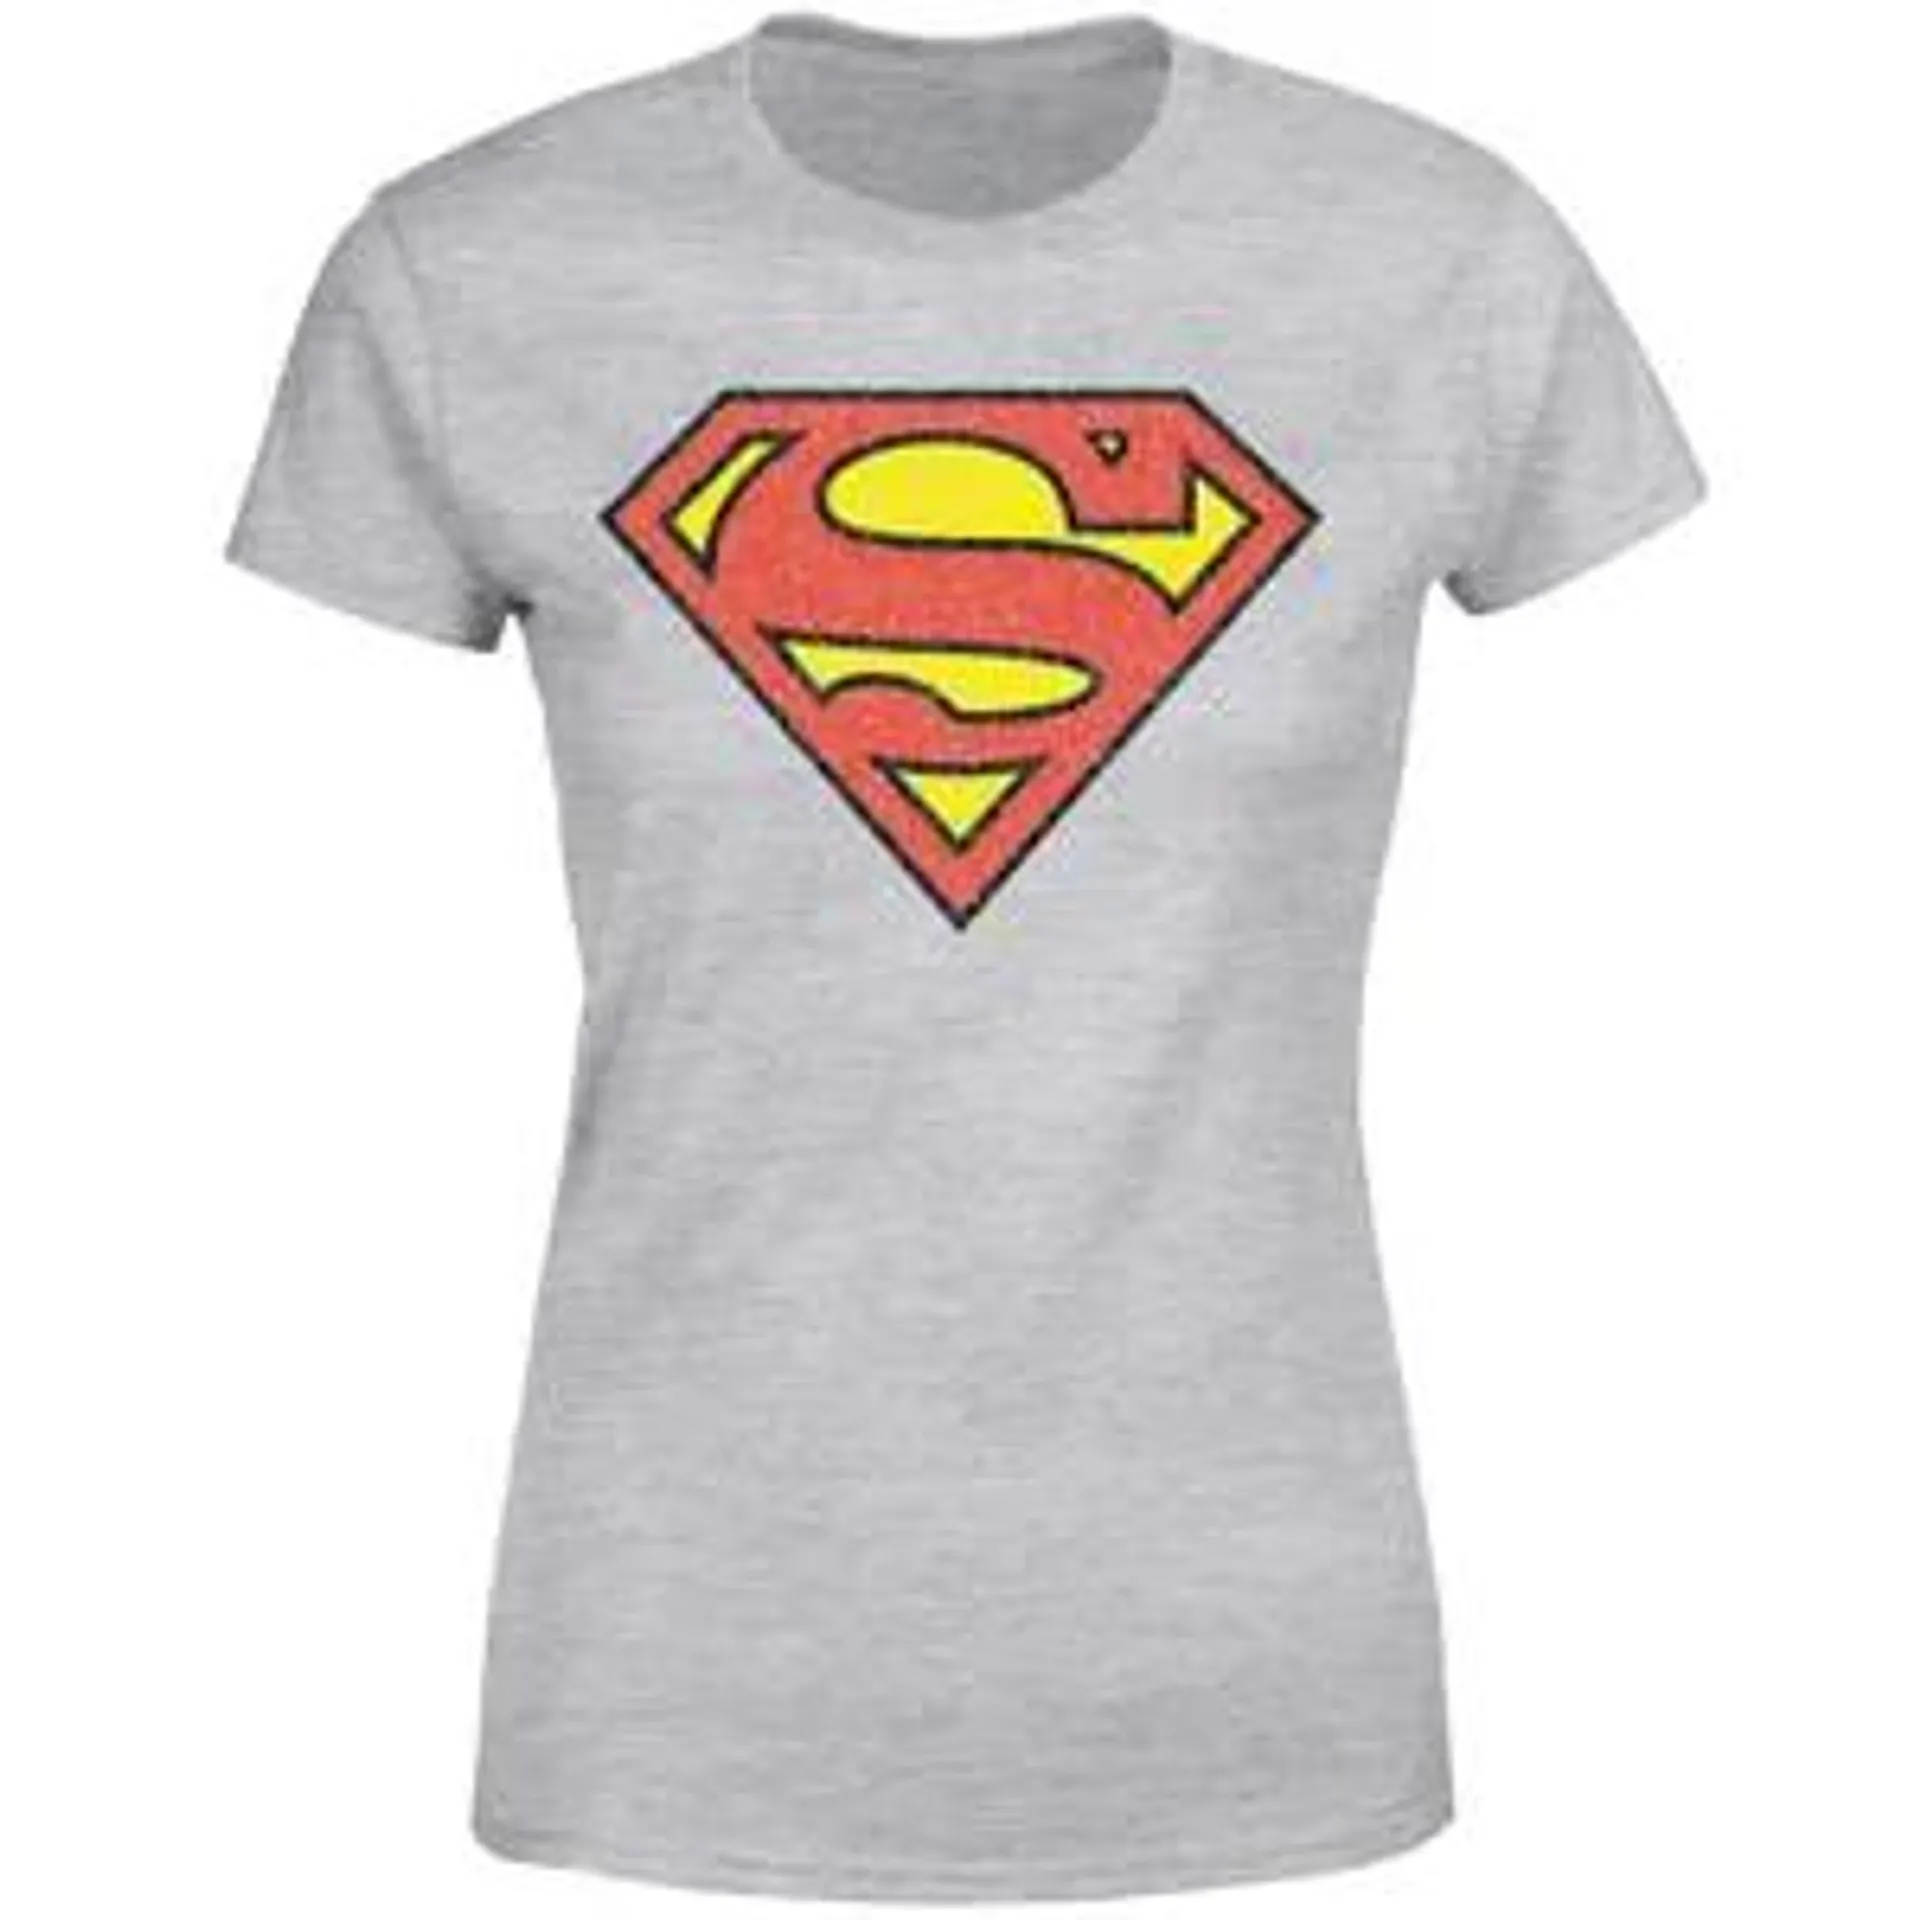 2 for £10 - Best Selling Women's Tees